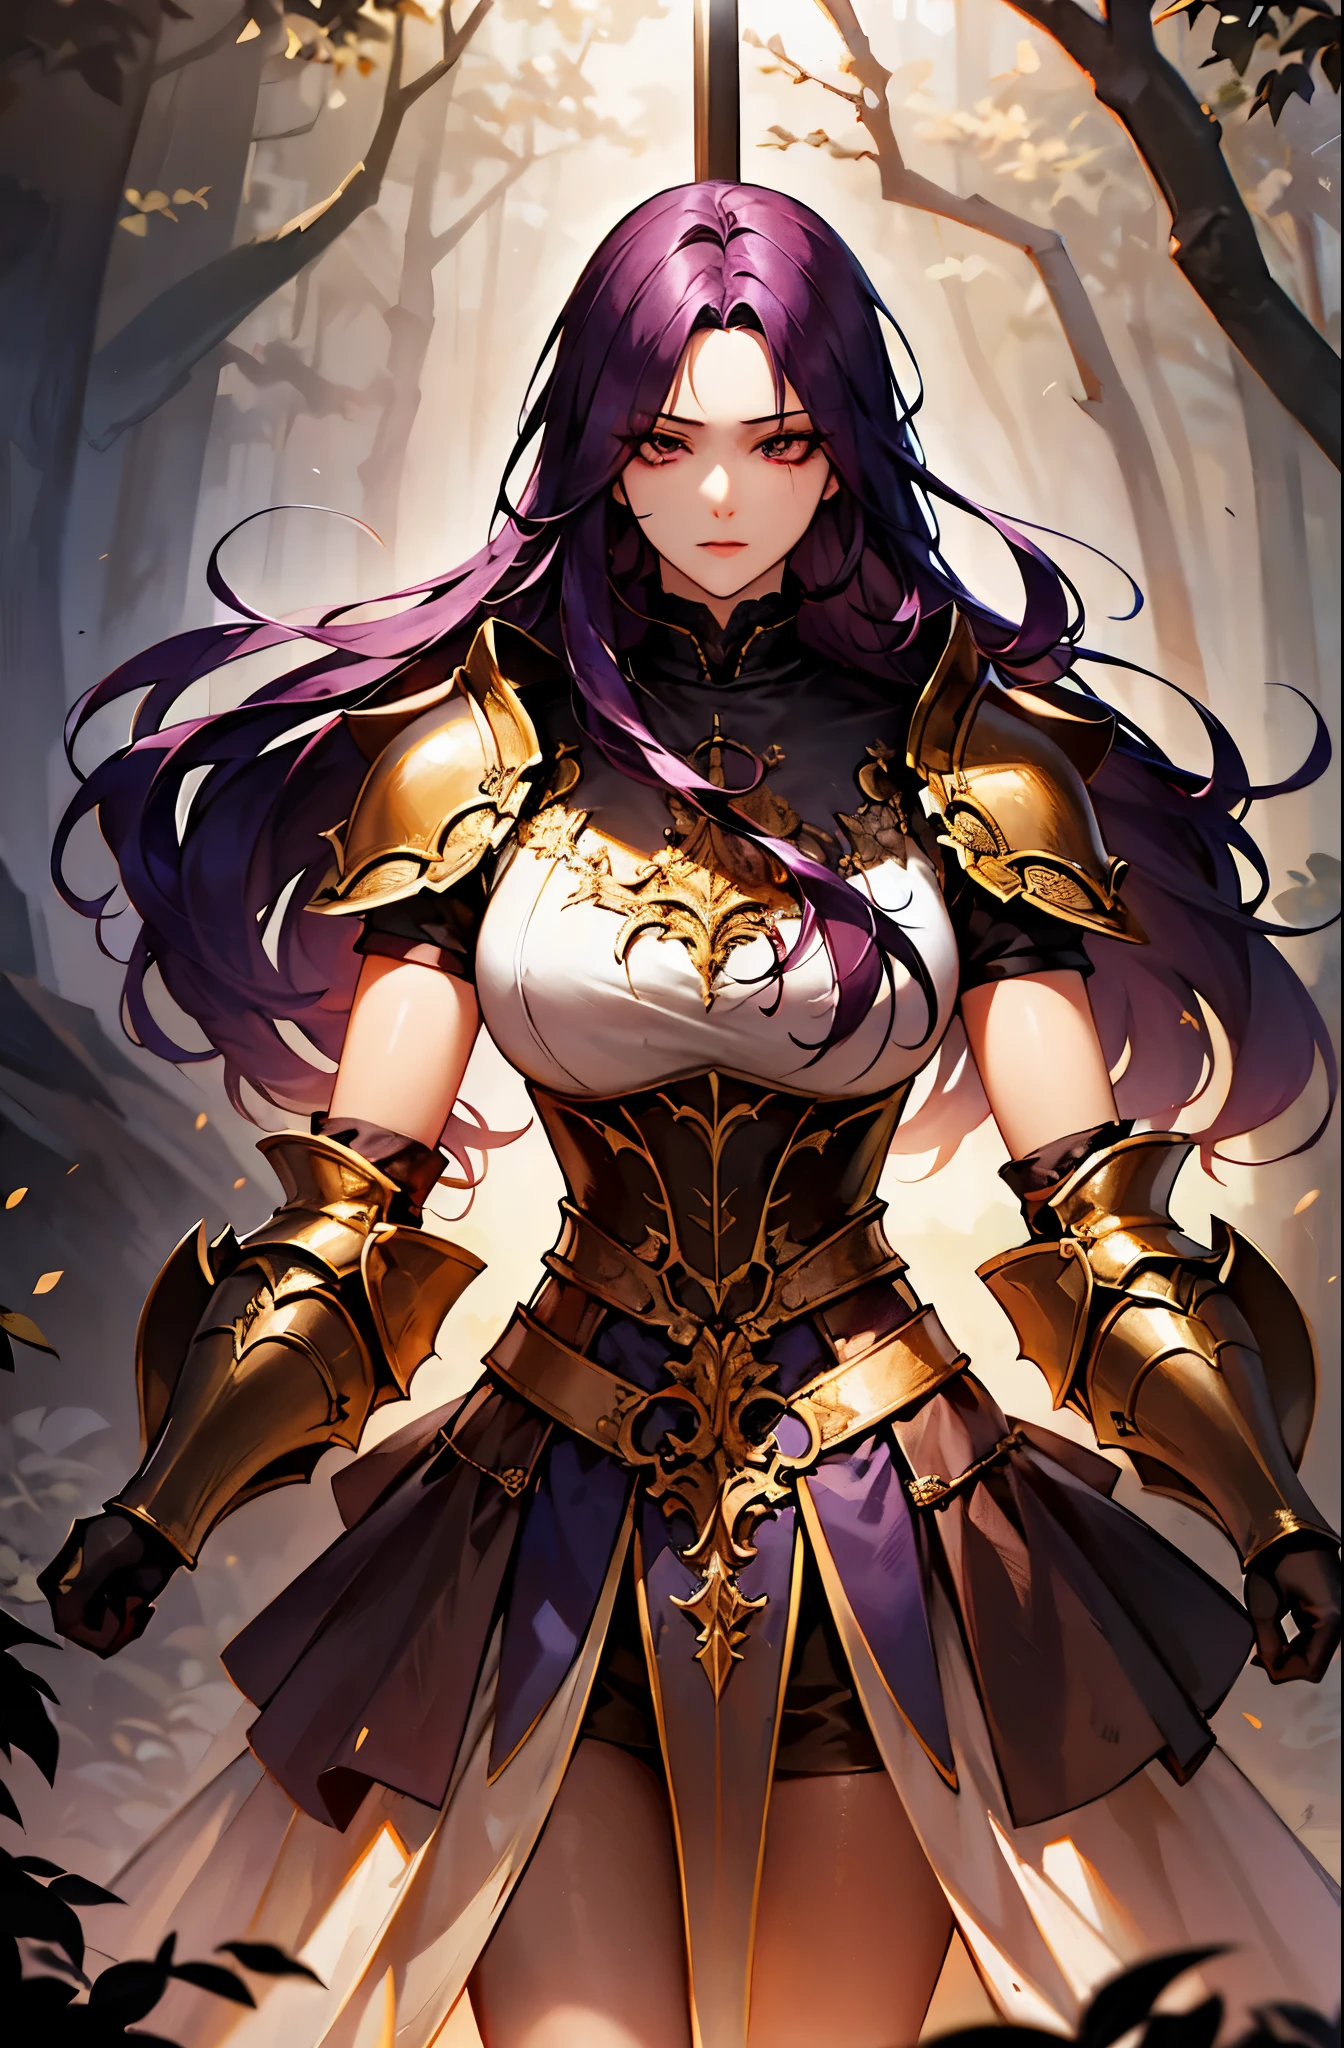 sexy style, 1 woman, mature, tall, dark purple hair, long hair, straight hair, violent eyes, delicate, feminine face, wearing shoulder armor, black medieval armor, armor with golden details, dress open on the sides, legs open to the shows, sexy legs, use of a red katana, mystical forest scene, perfect lighting, illustration style.